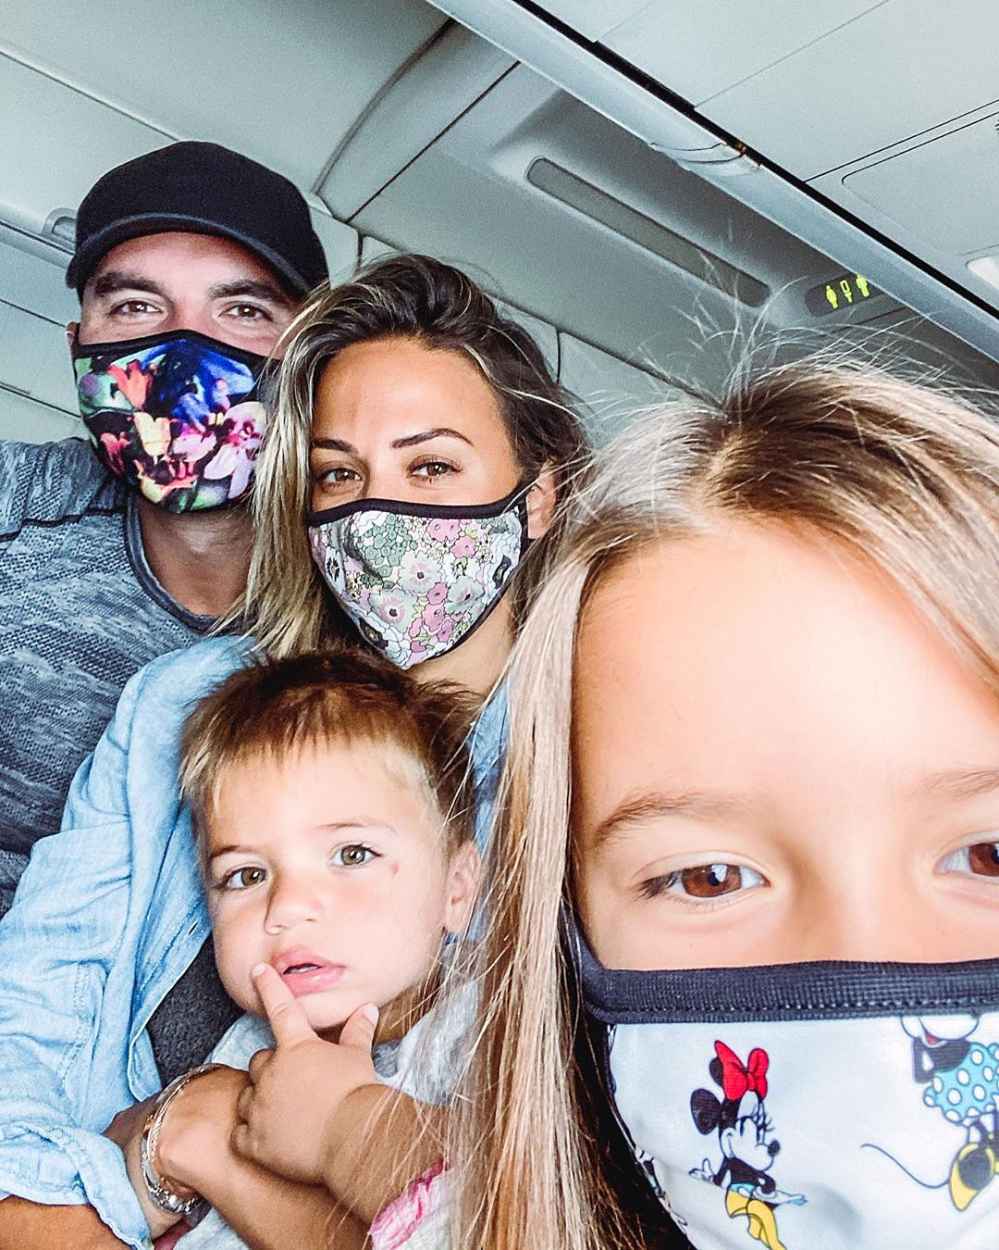 Jana Kramer Defends Going on a Family Vacation During COVID-19 Pandemic